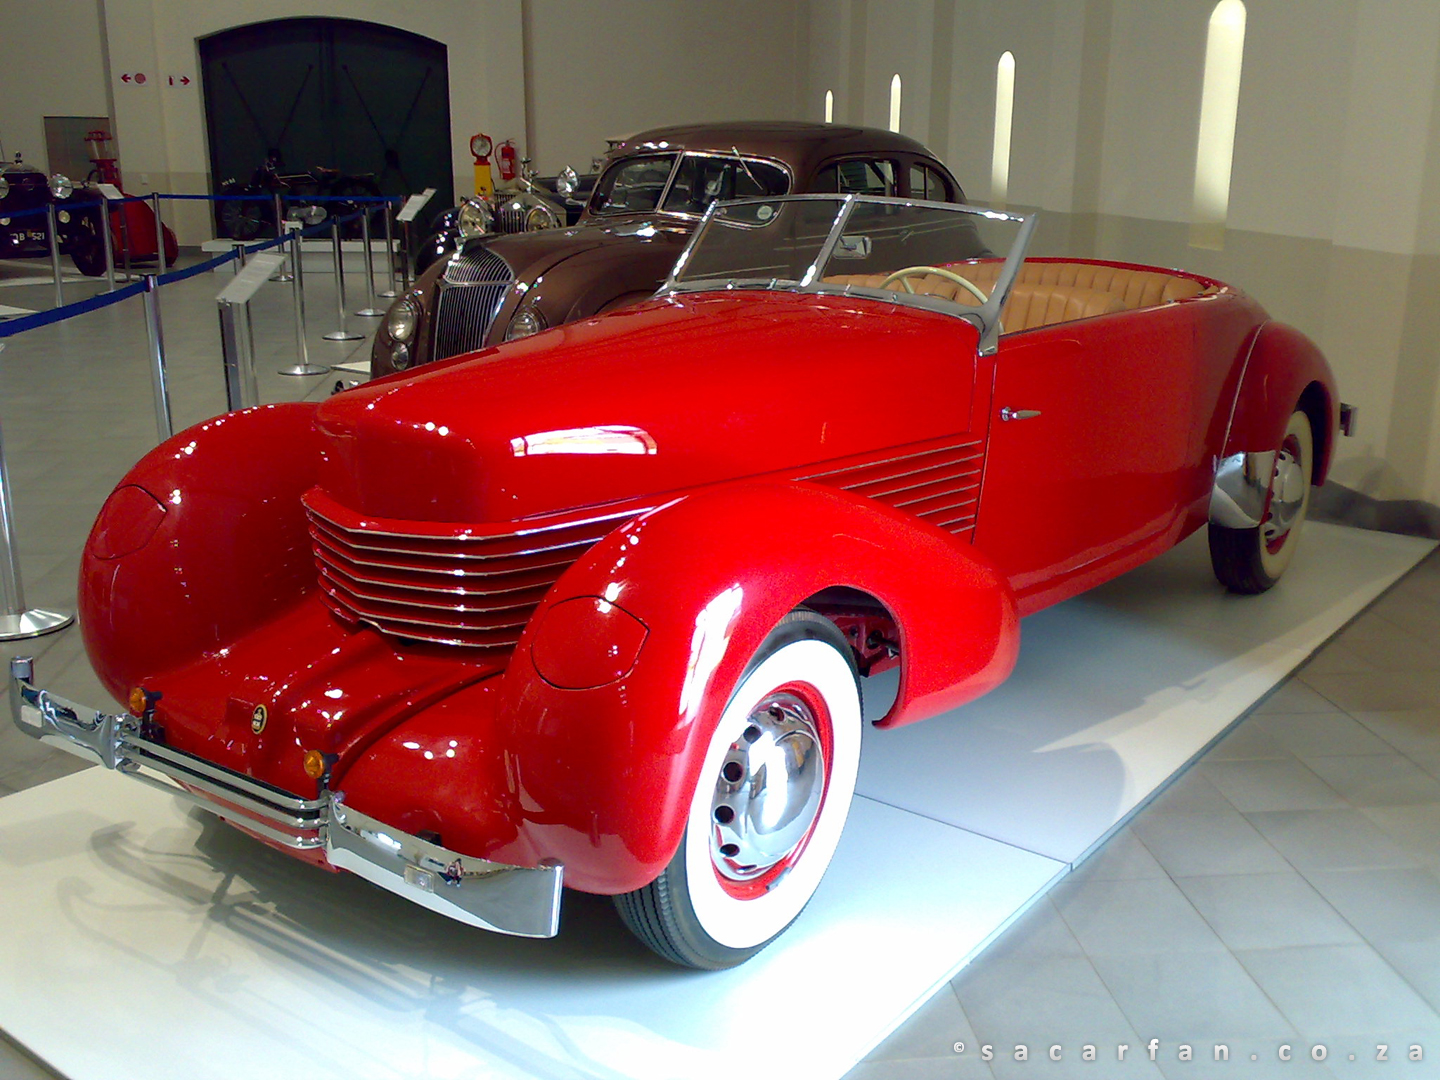 Cord Convertible: Best Images Collection of Cord Convertible